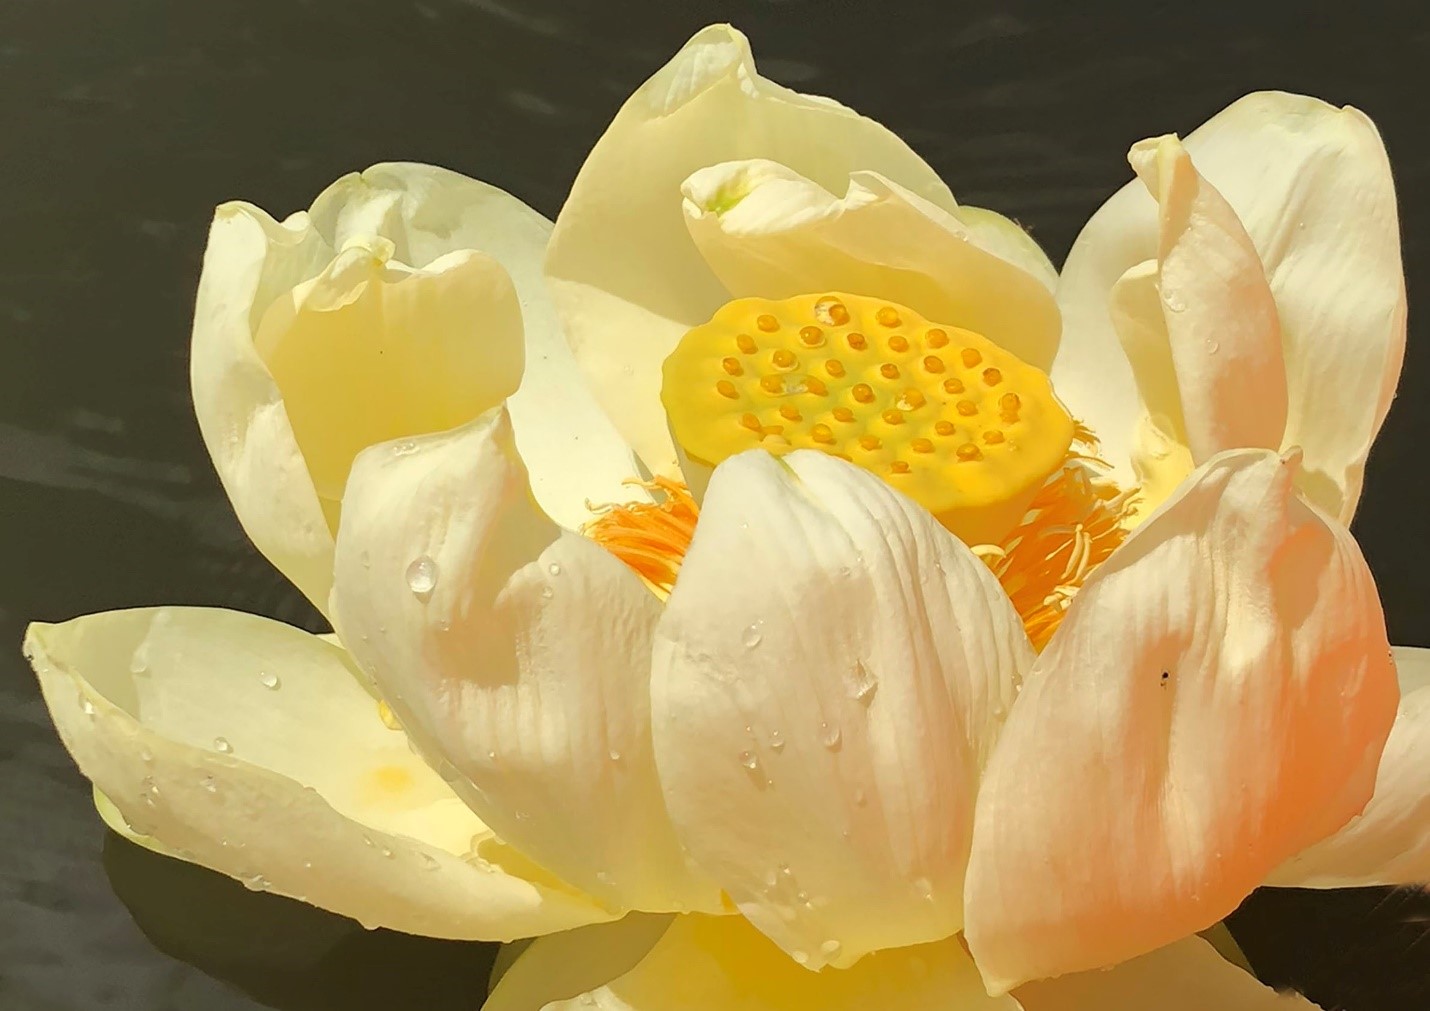 Pale yellow flower with a yellow, flat center is floating in water.